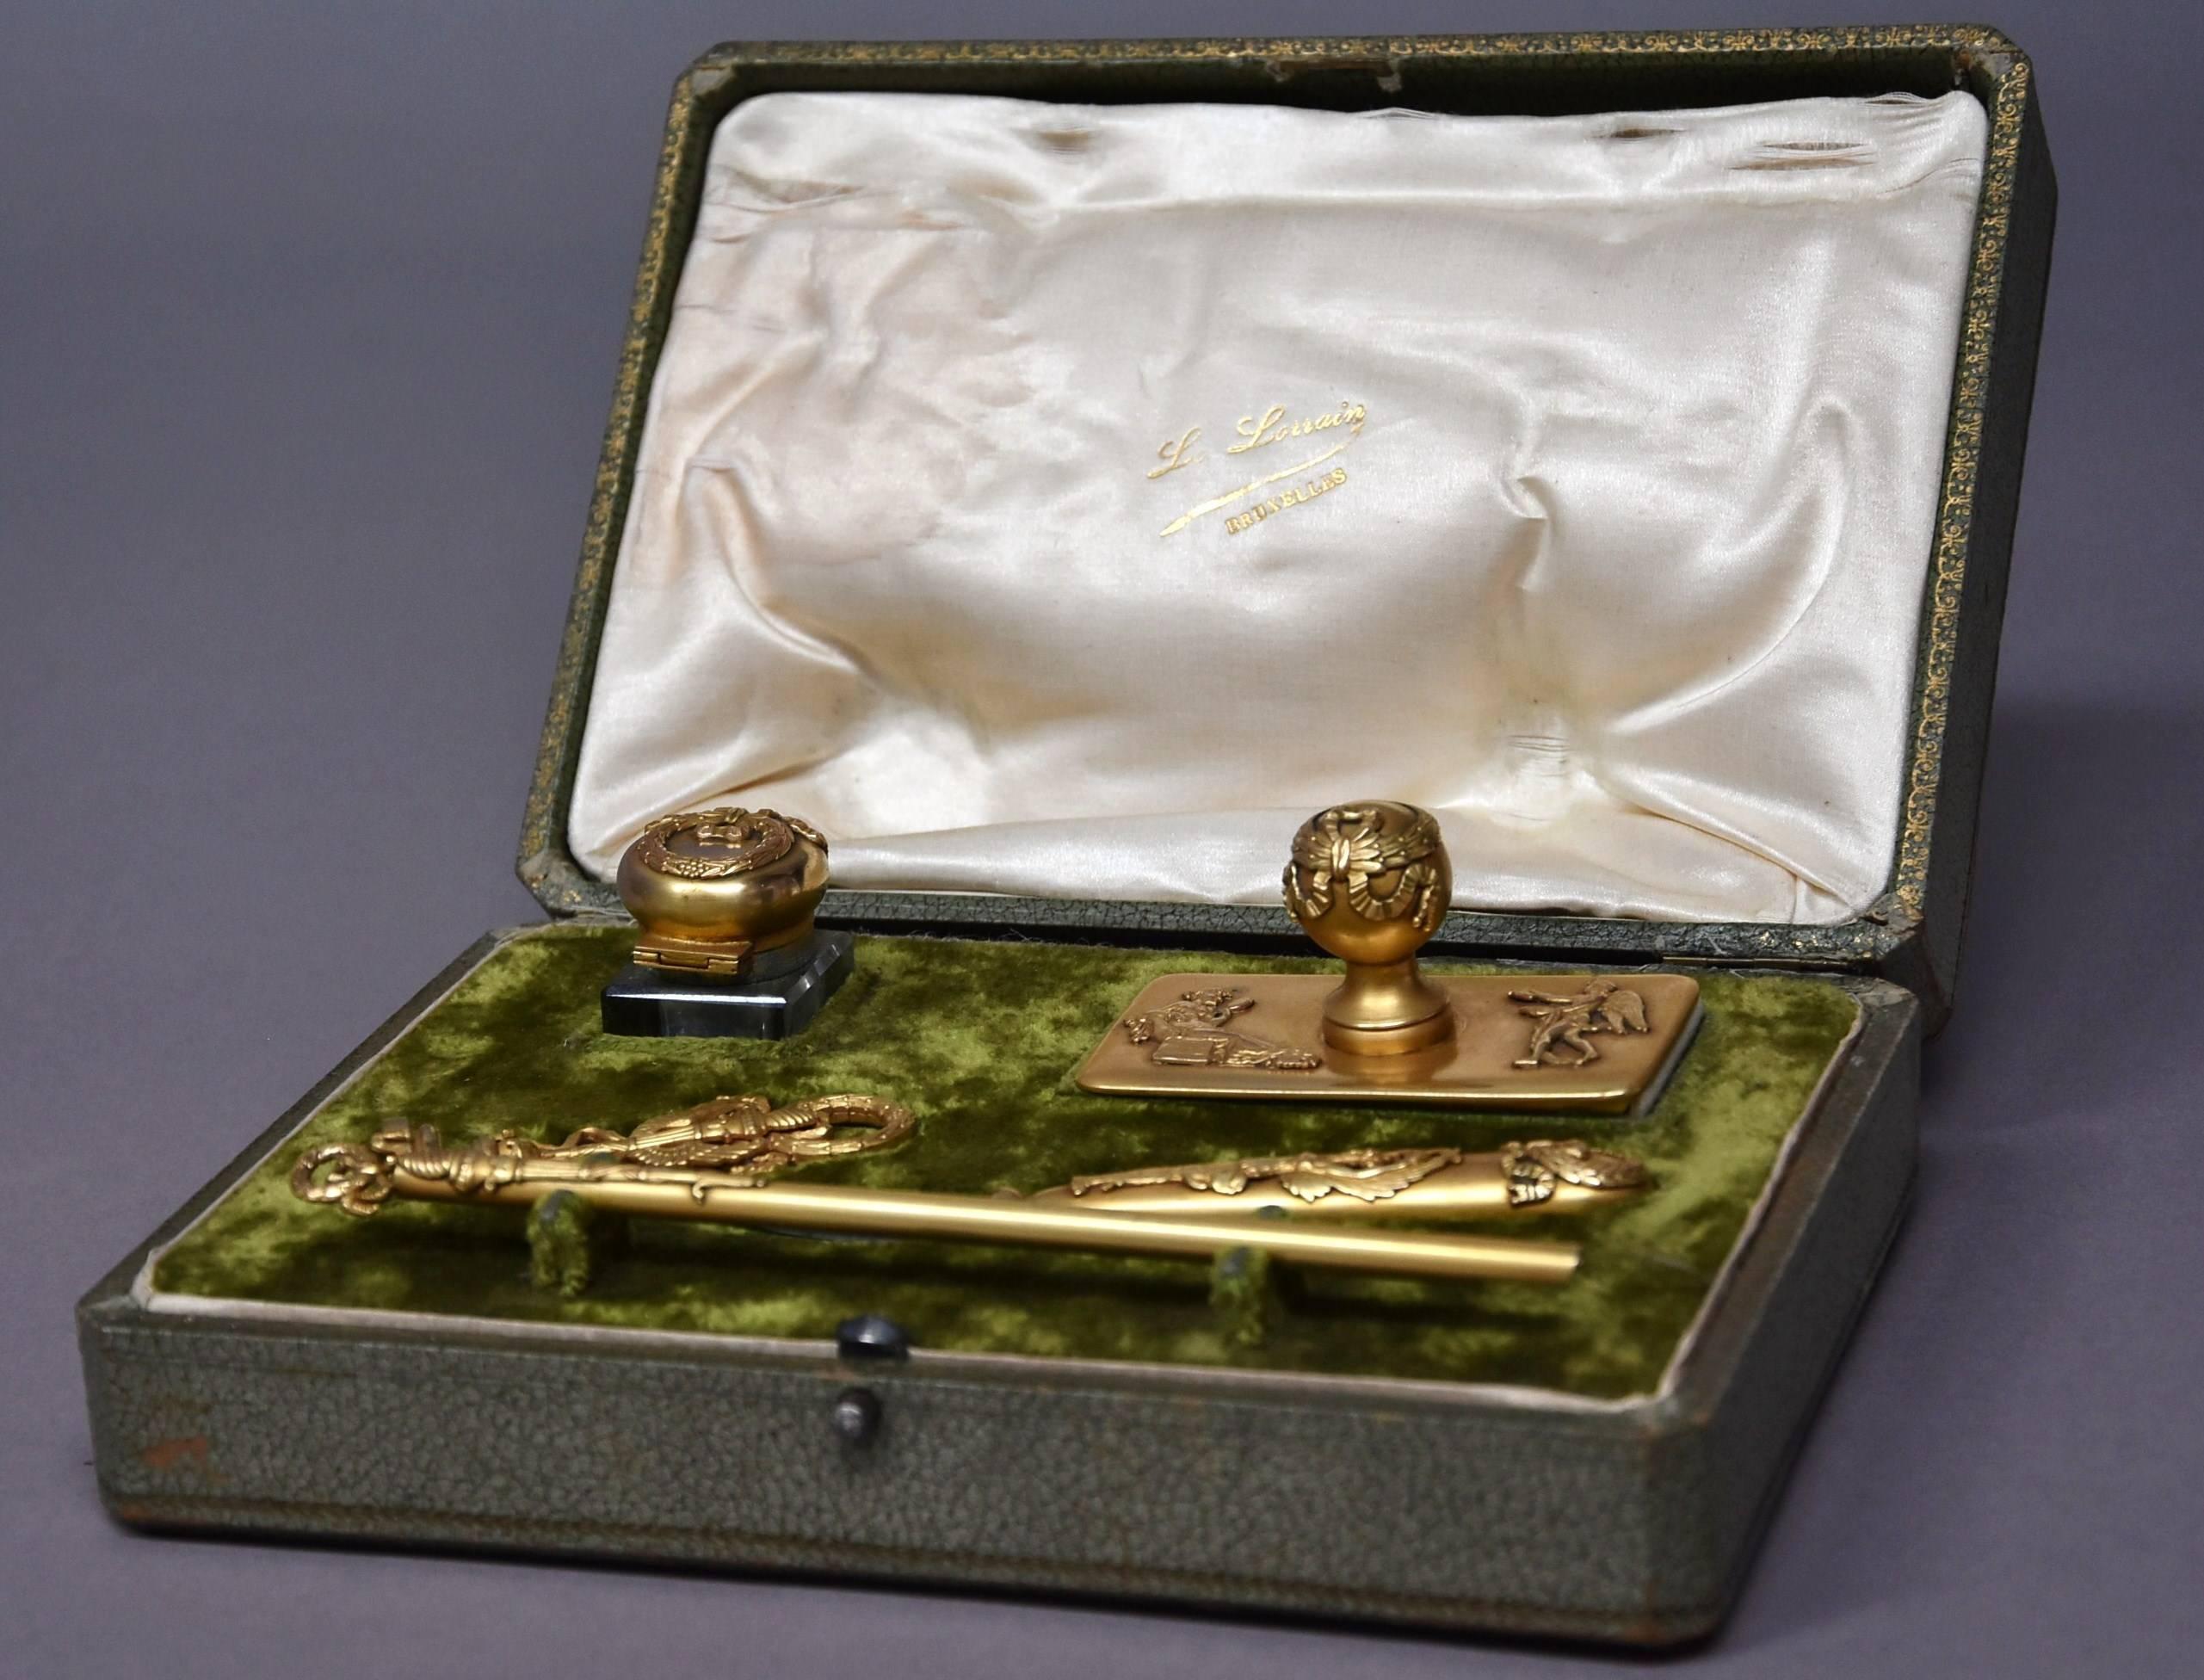 An exceptional quality early 20th century five-piece gilt metal writing set in the Empire style and in original case.

This highly decorative set consists of a glass inkwell, blotter, wax seal, letter opener and pen all with gilt metal Empire